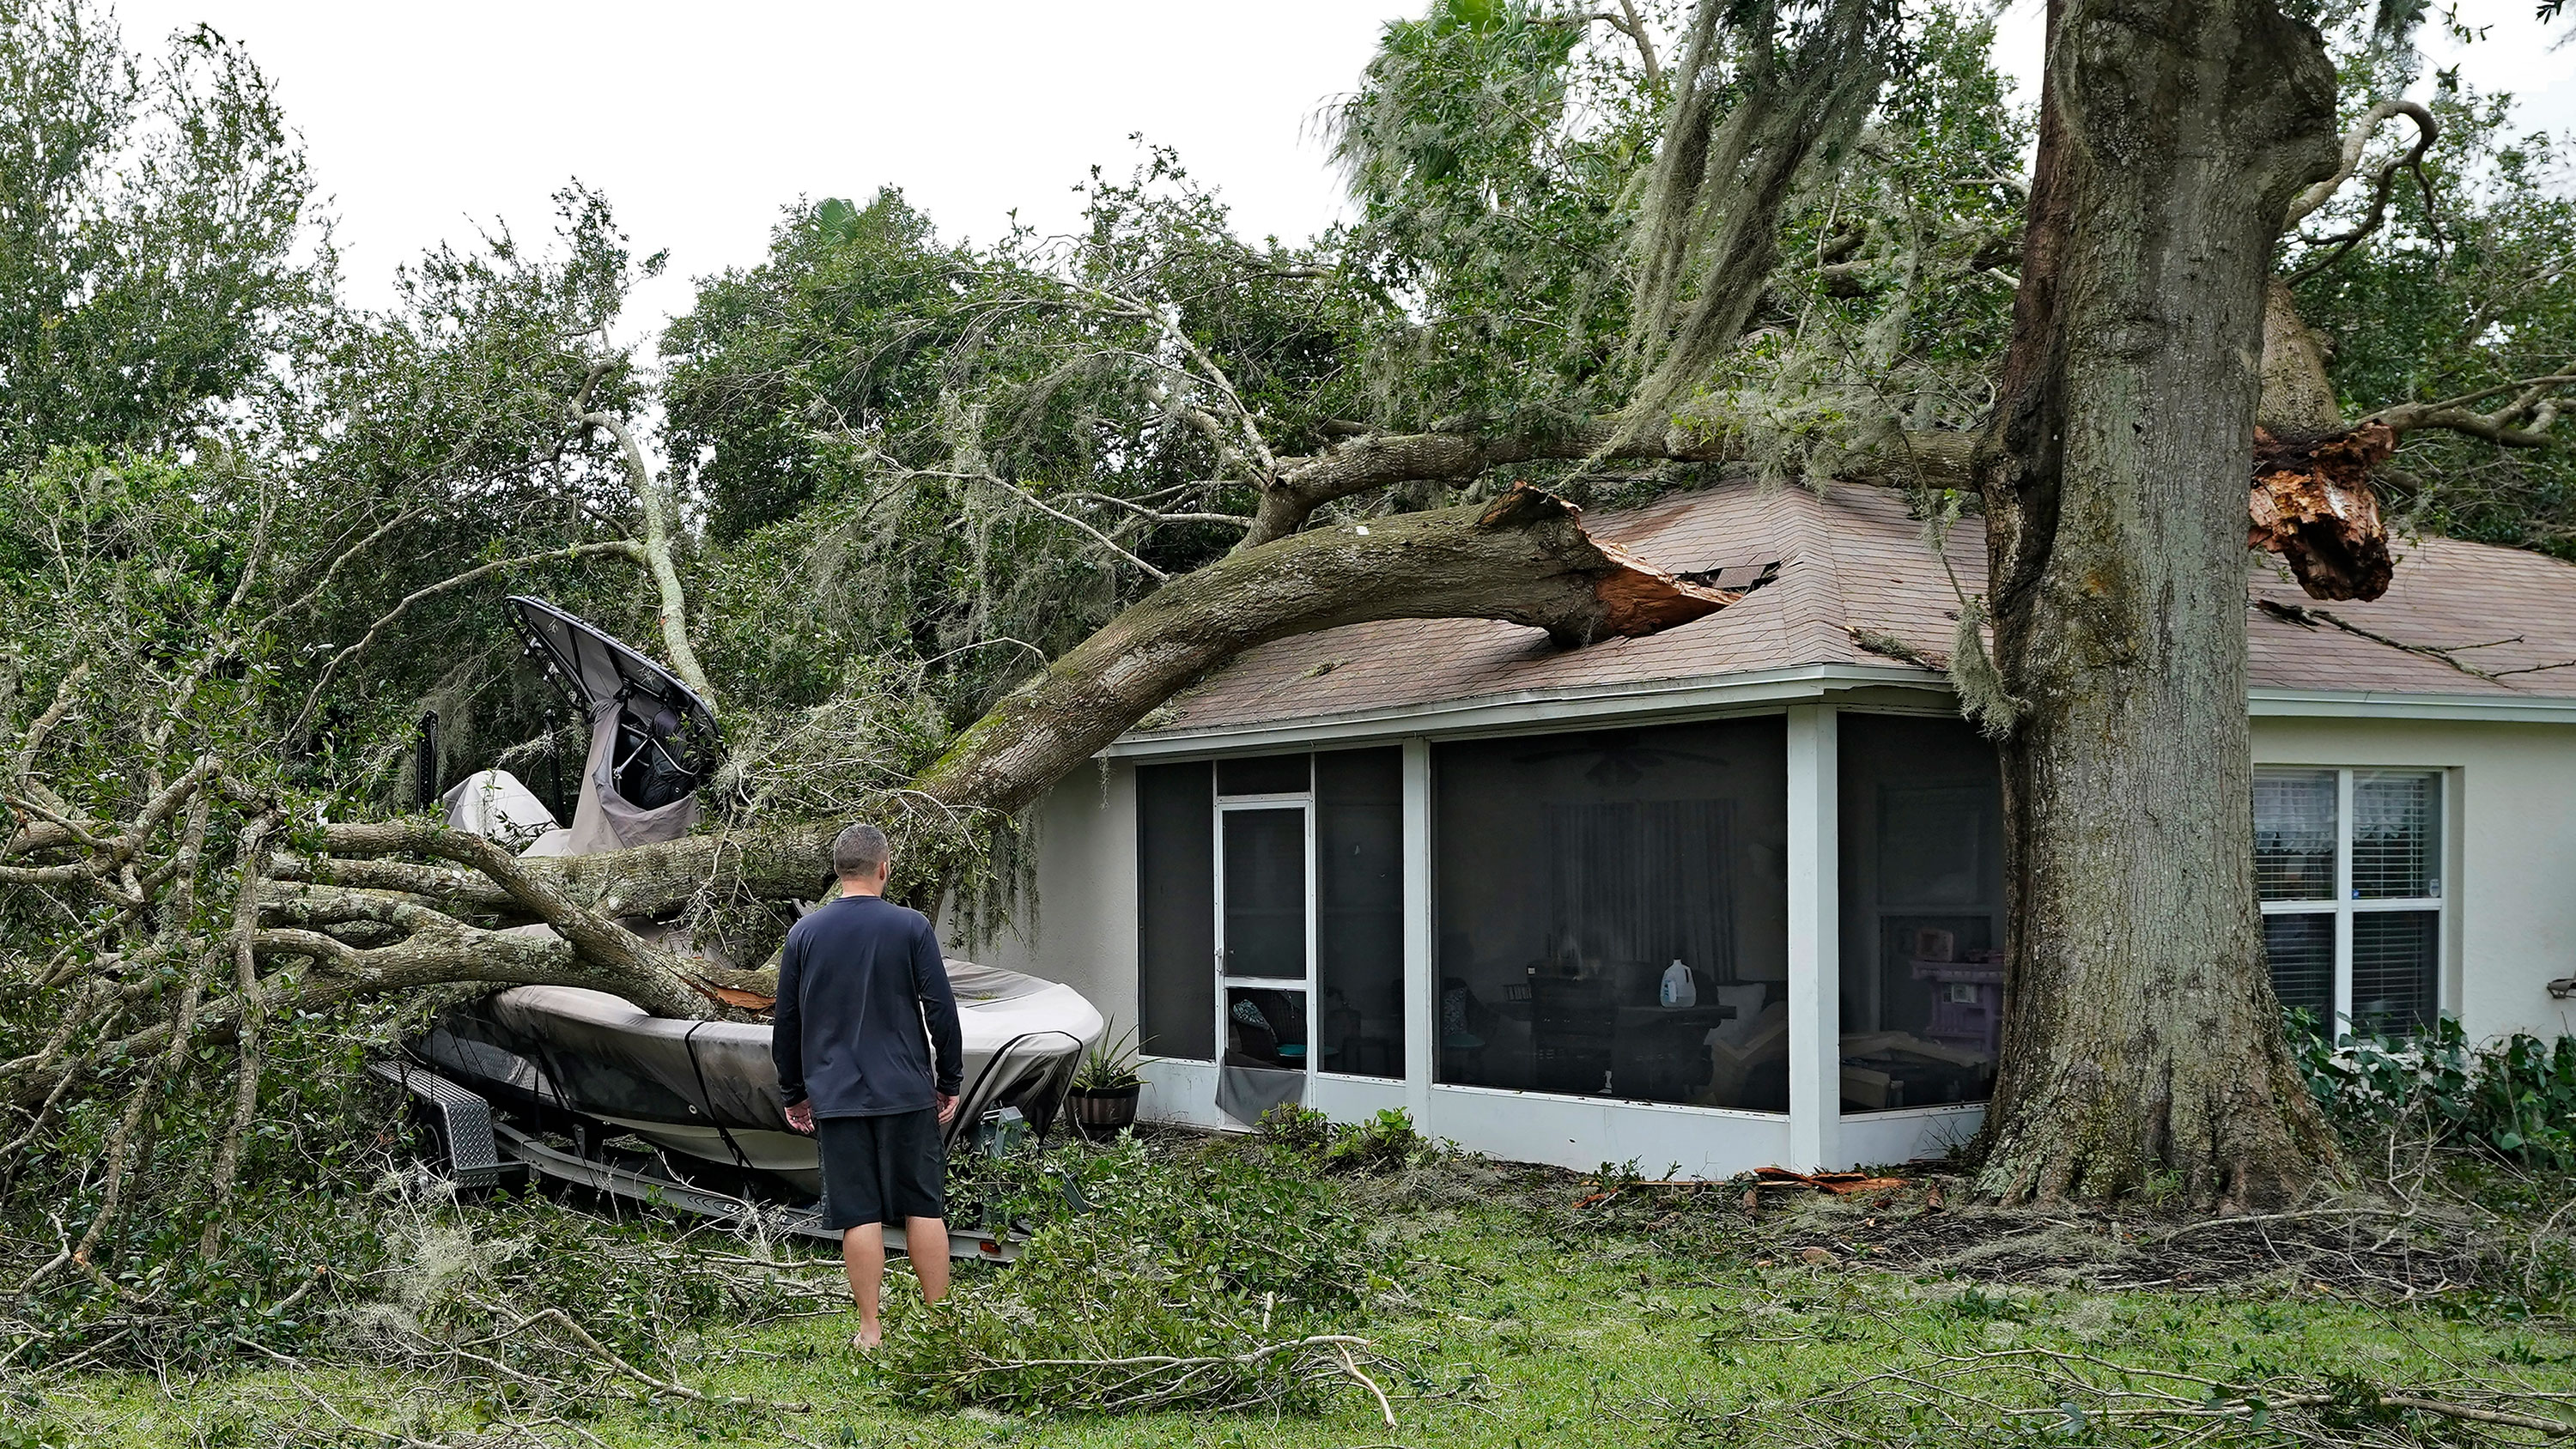 People survey damage to their home in Valrico, Florida.